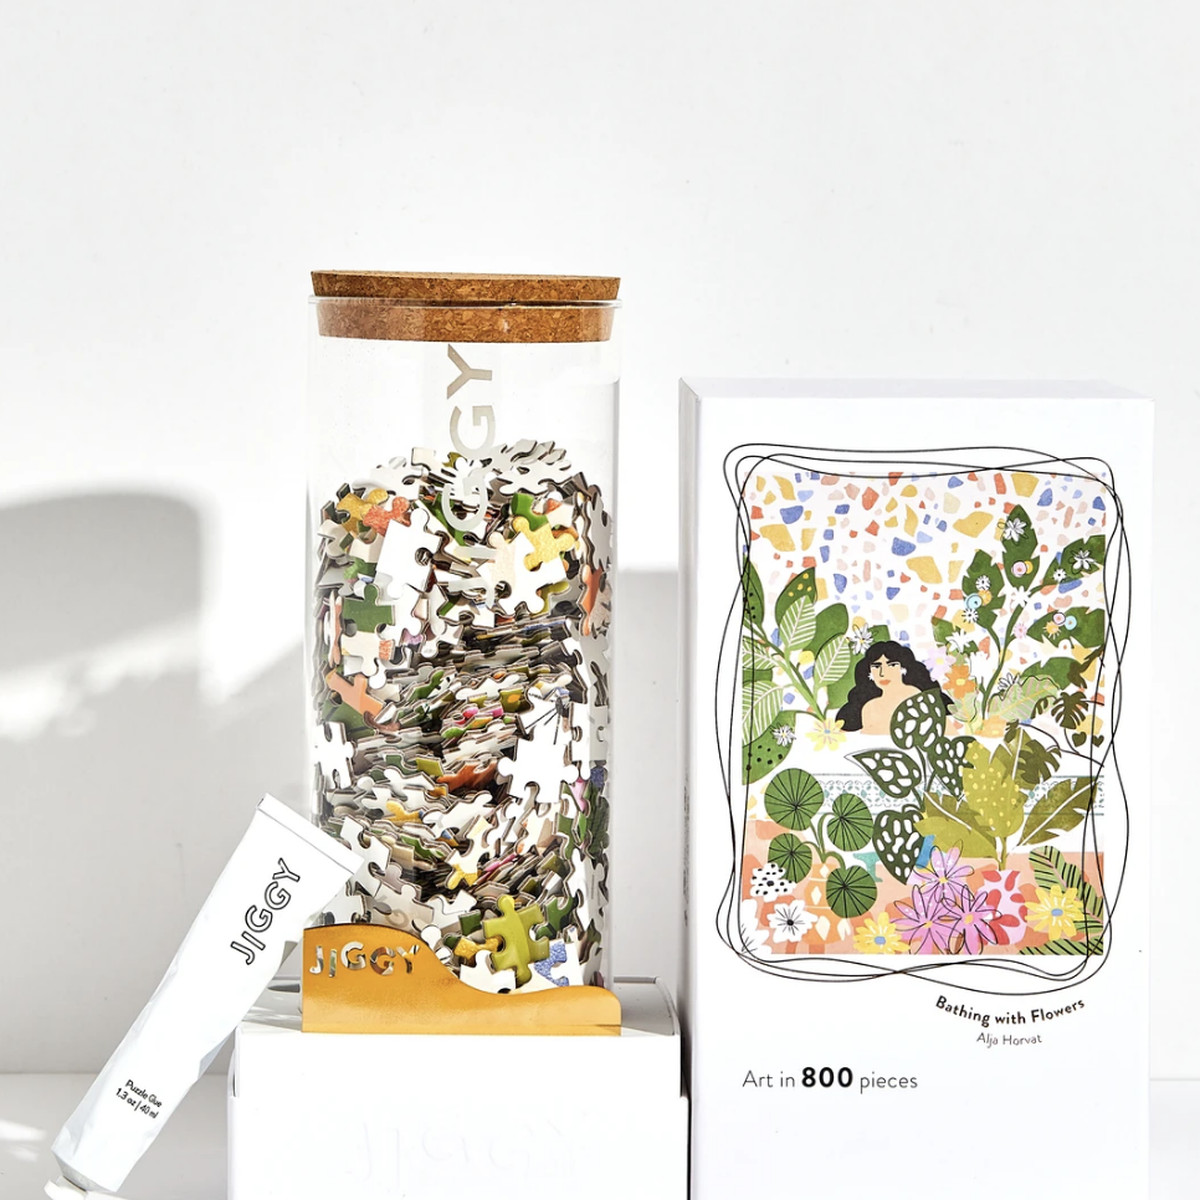 The box and pieces for a Jiggy “Bathing With Flowers” puzzle